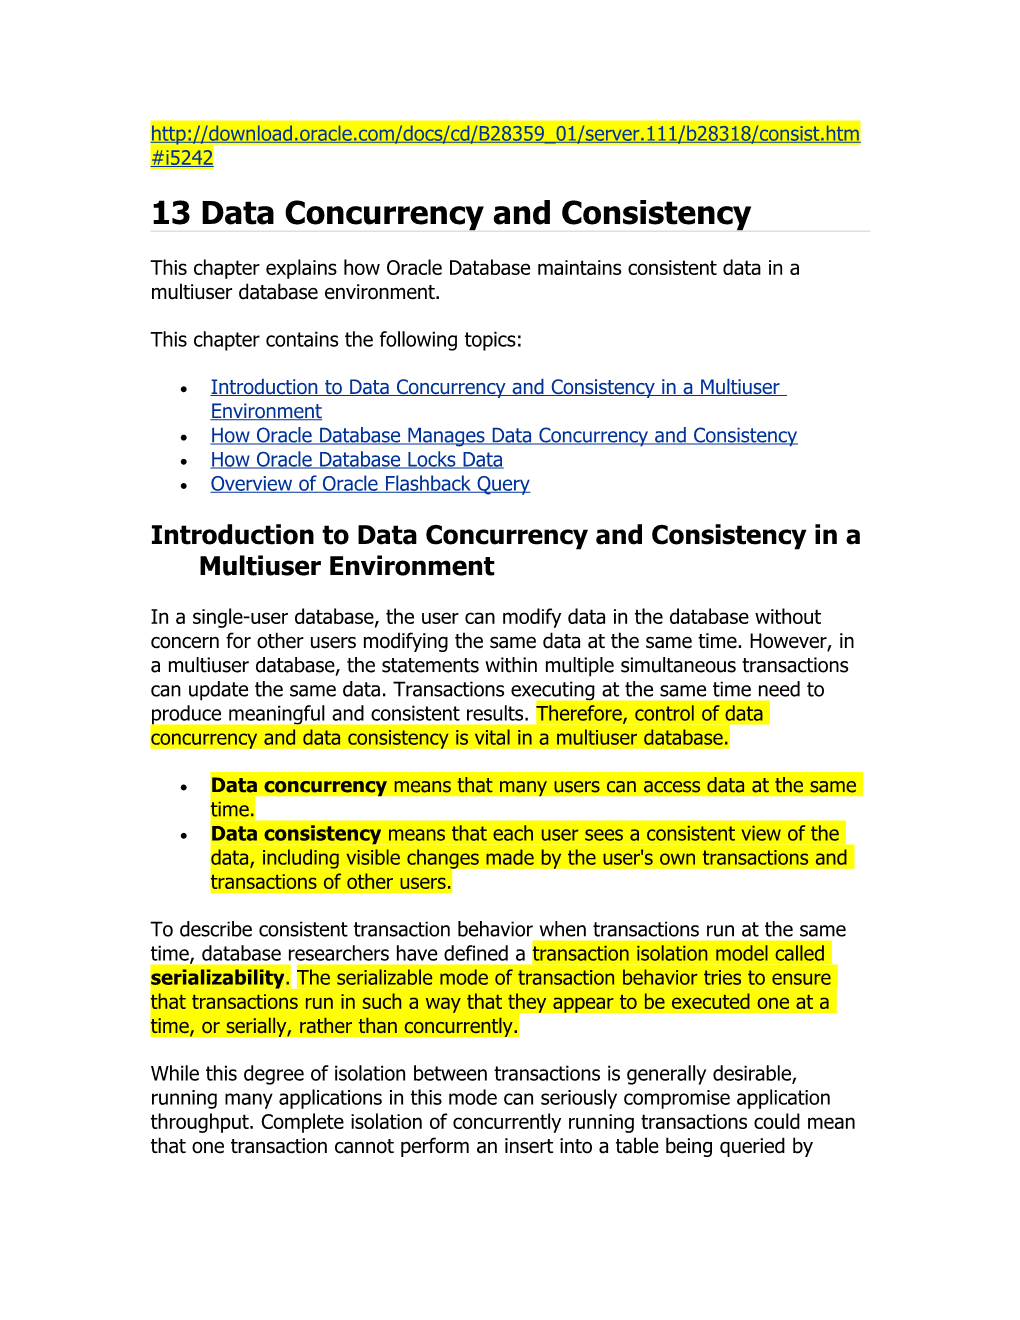 13 Data Concurrency and Consistency